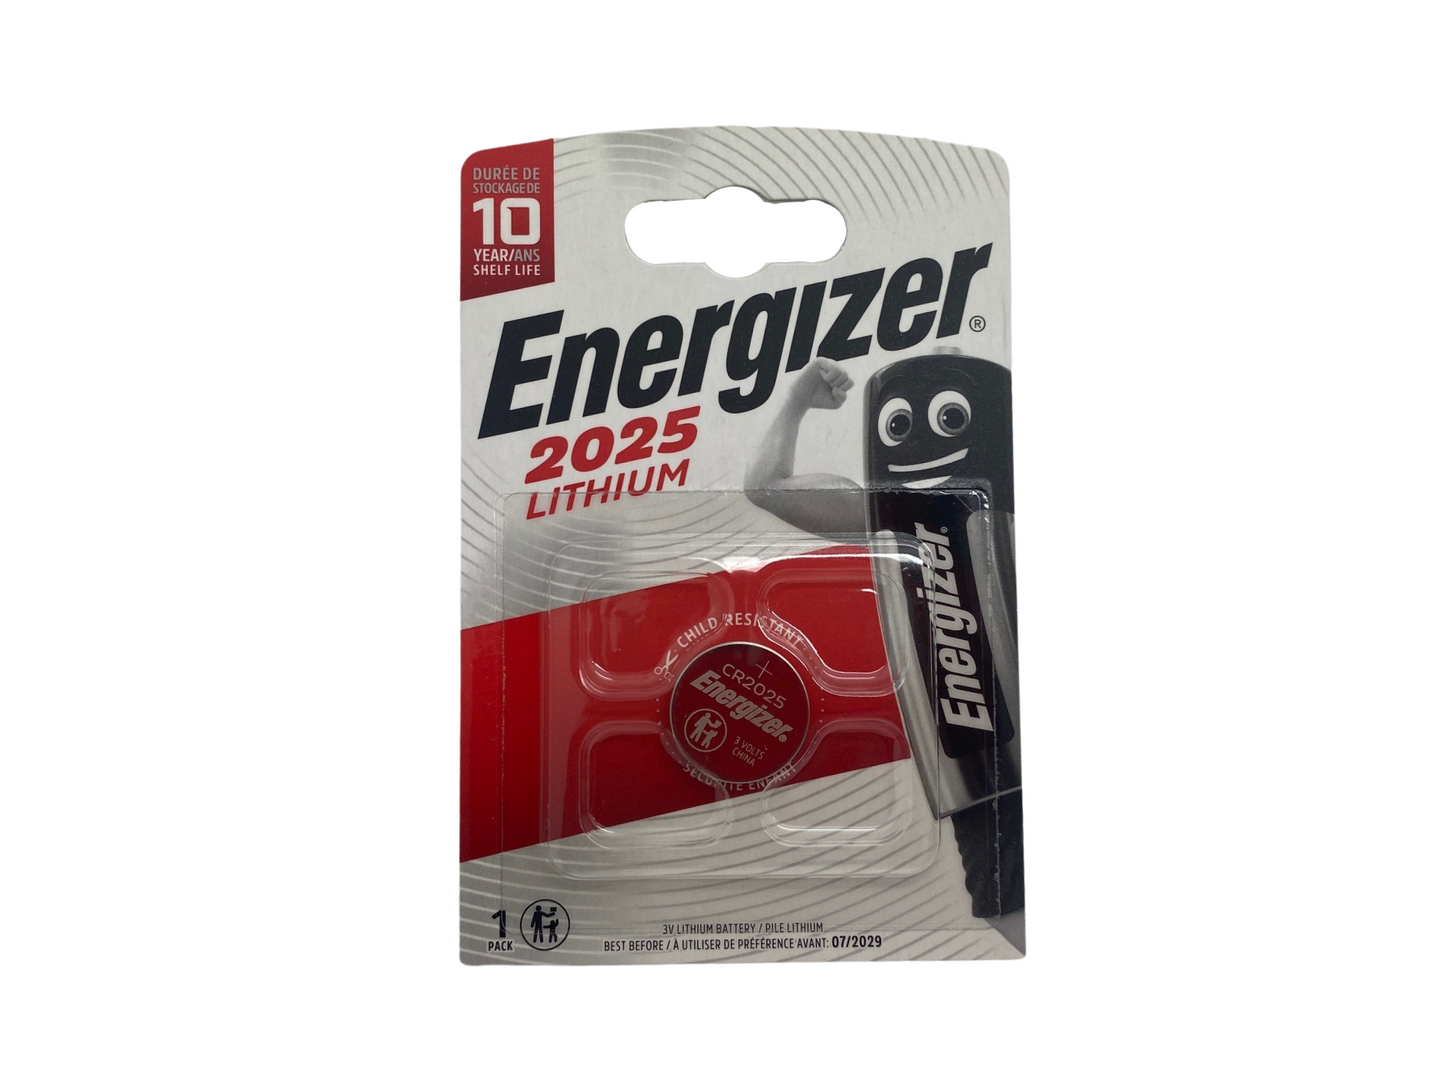 Energizer CR2025 Lithium Cell Battery